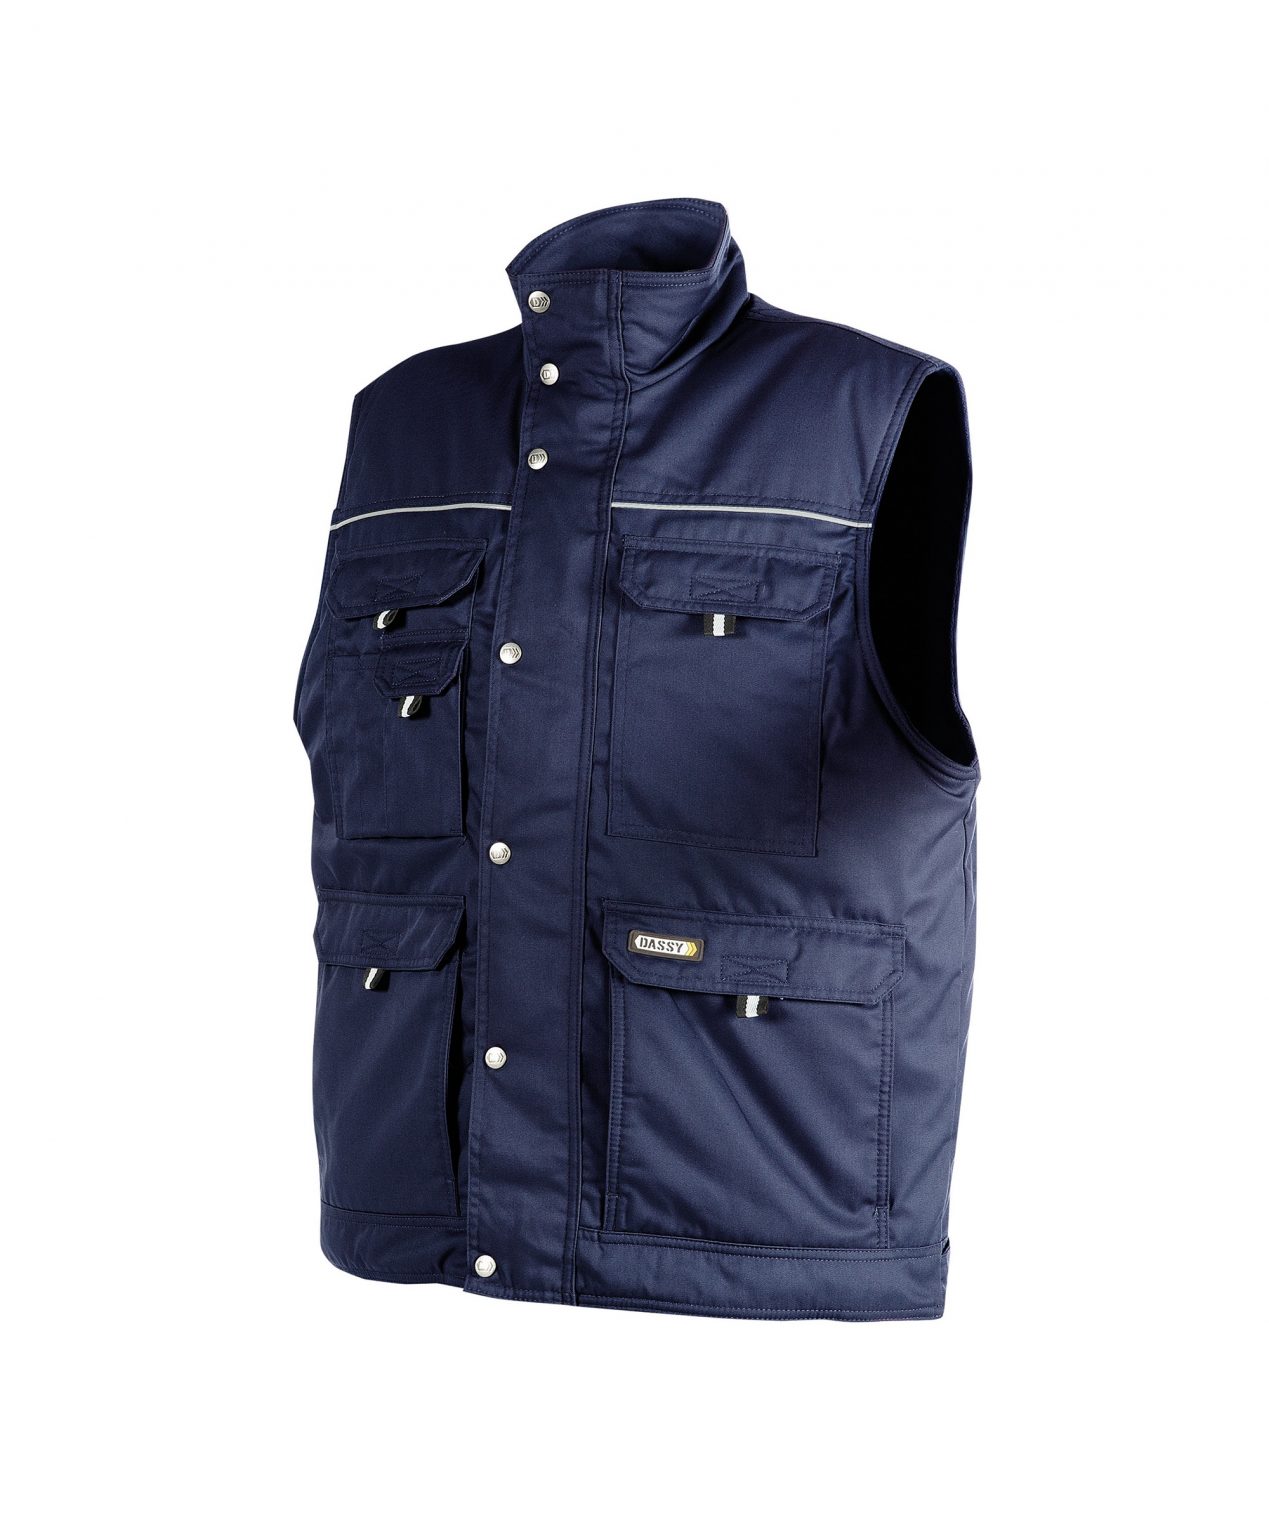 mons body warmer navy front